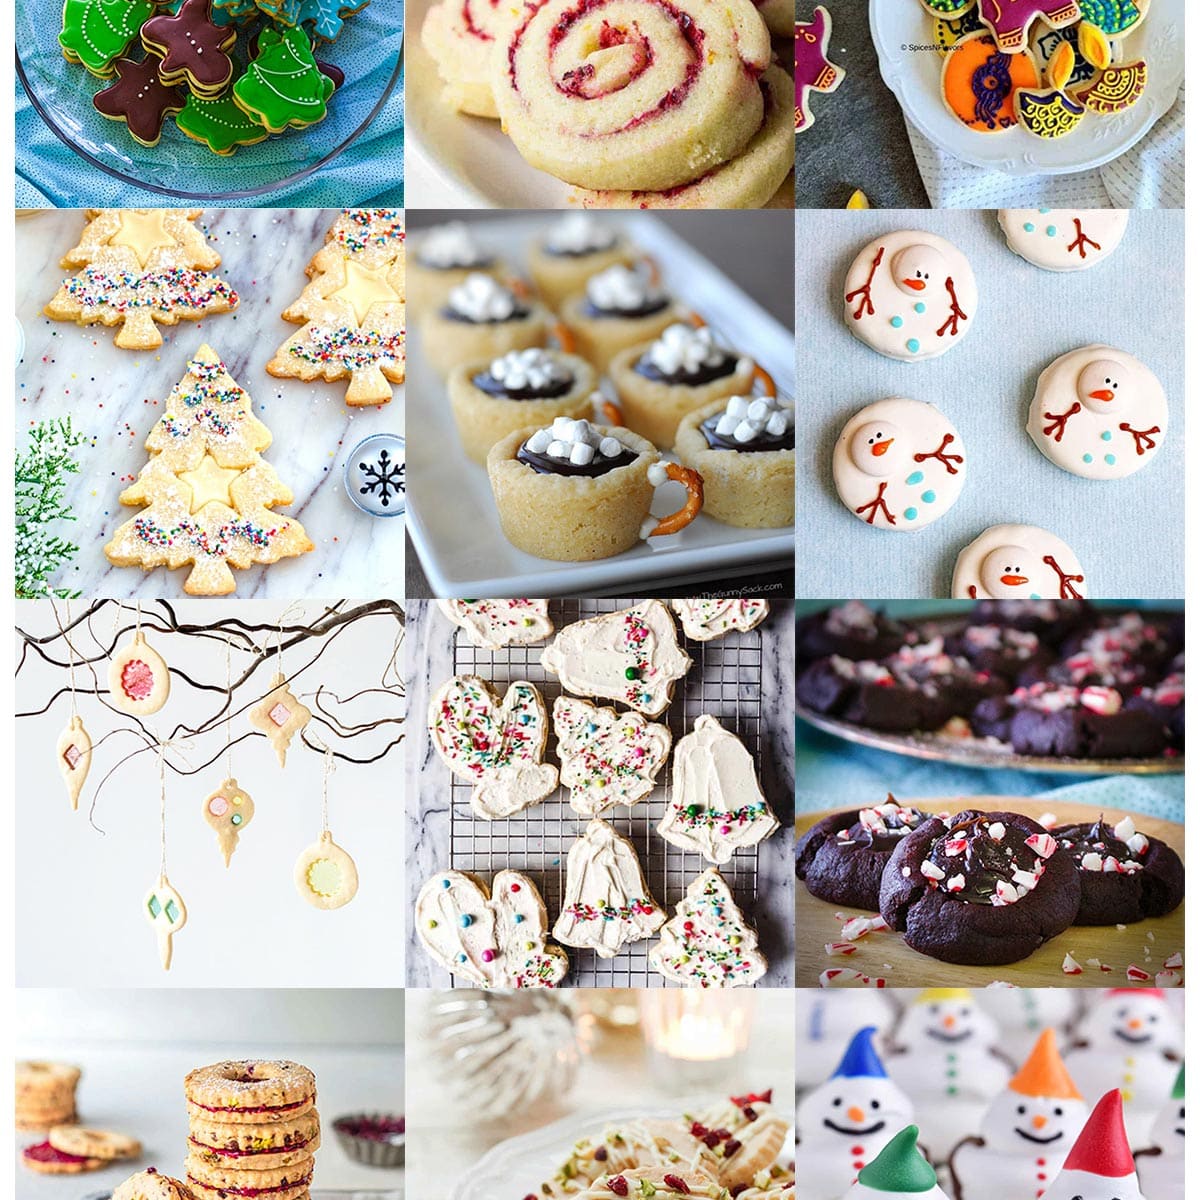 50 different recipes for creative Christmas cookies.